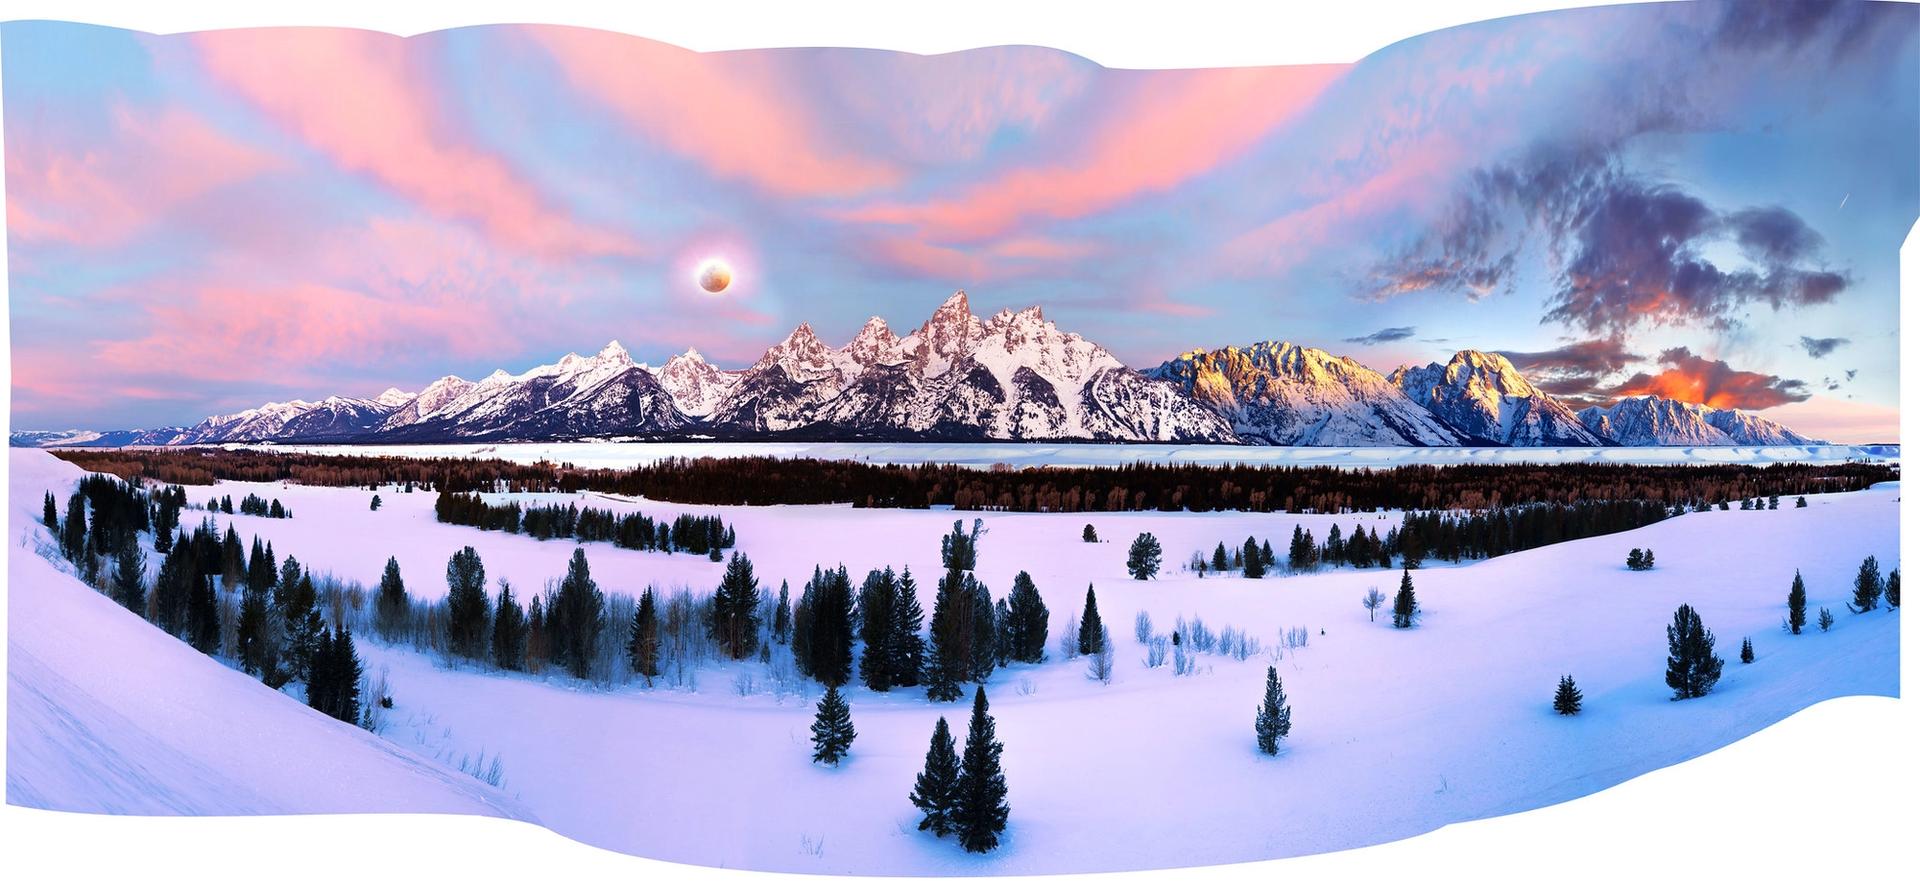 Jeremy Kidd's Jackson Hole, Teton Grand Master Sunrise 1 (2019) shown by Imago Galleries Courtesy of the artist and Imago Galleries